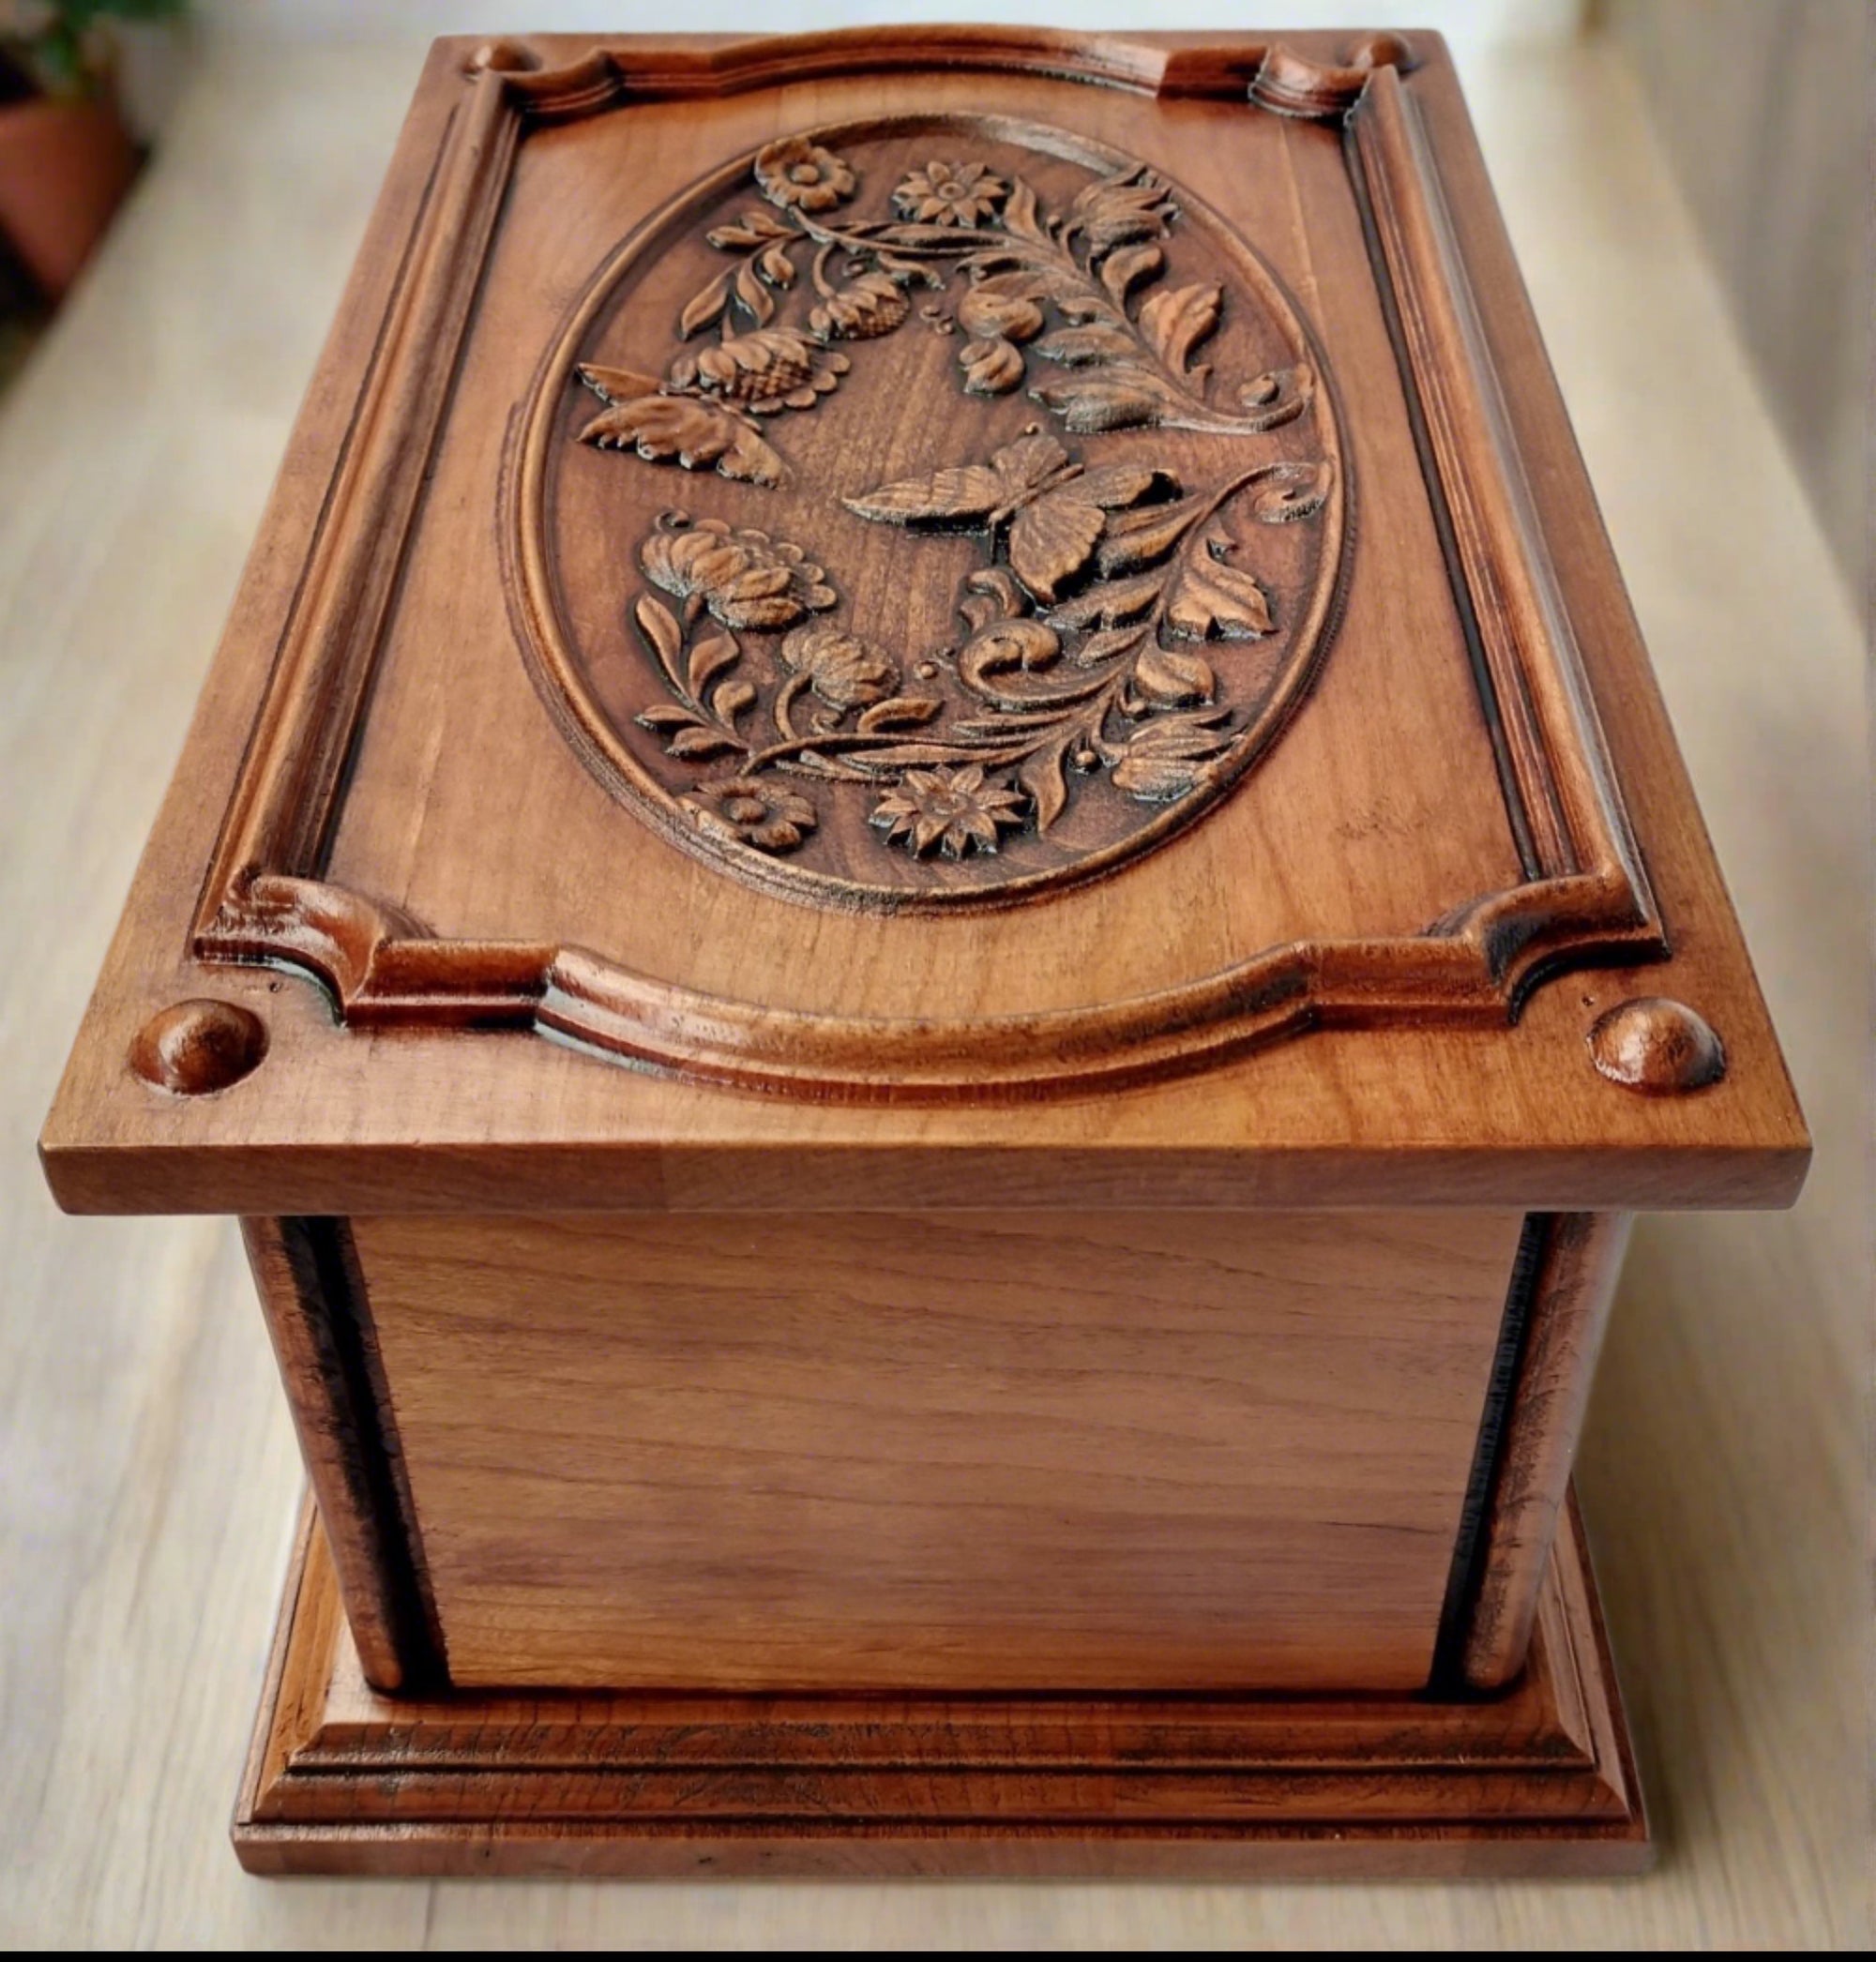 The top has carved images of butterflies and flowers surrounded by an ornate border. This adult size urn for mother/mom/grandmother/grandma is designed for the storage of the cremated ashes of a human.